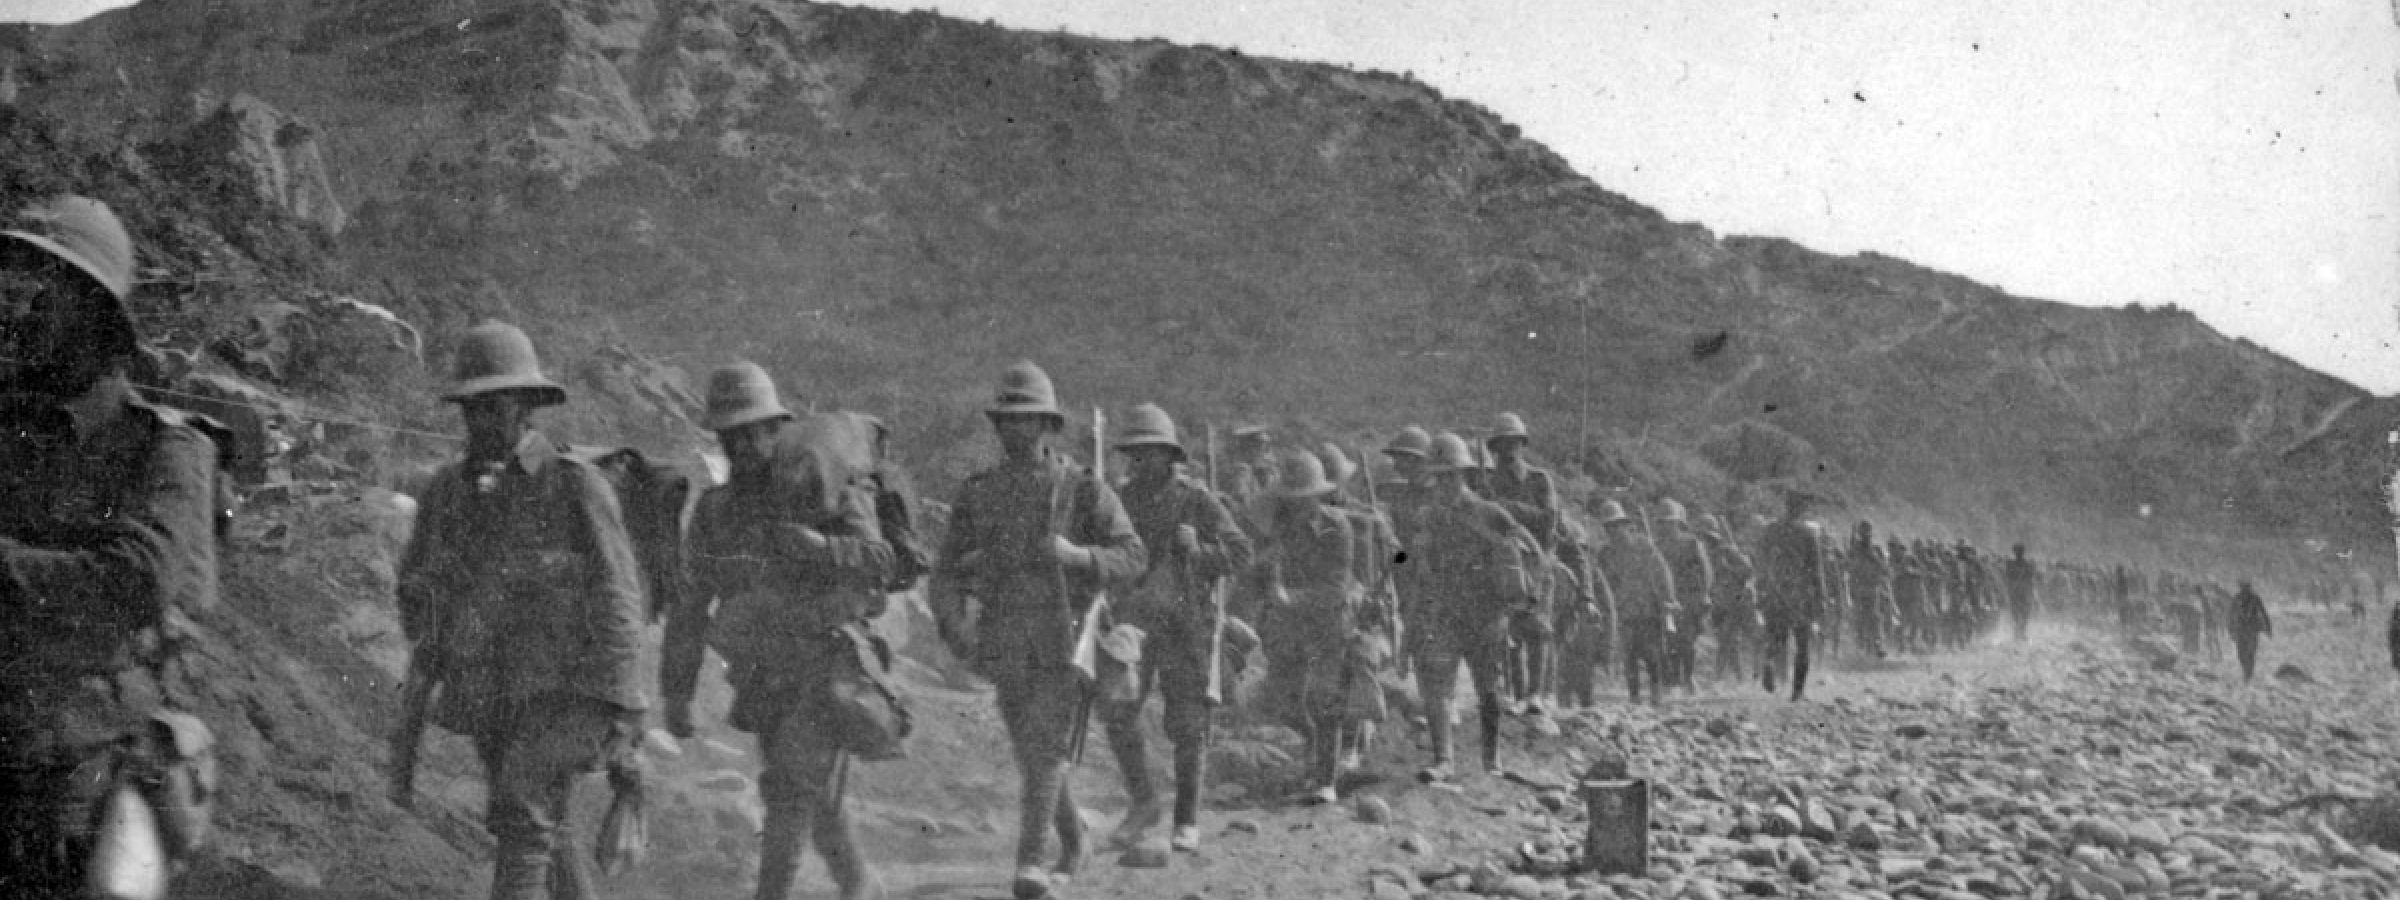 British soldiers at Anzac Cove marching along North Beach.